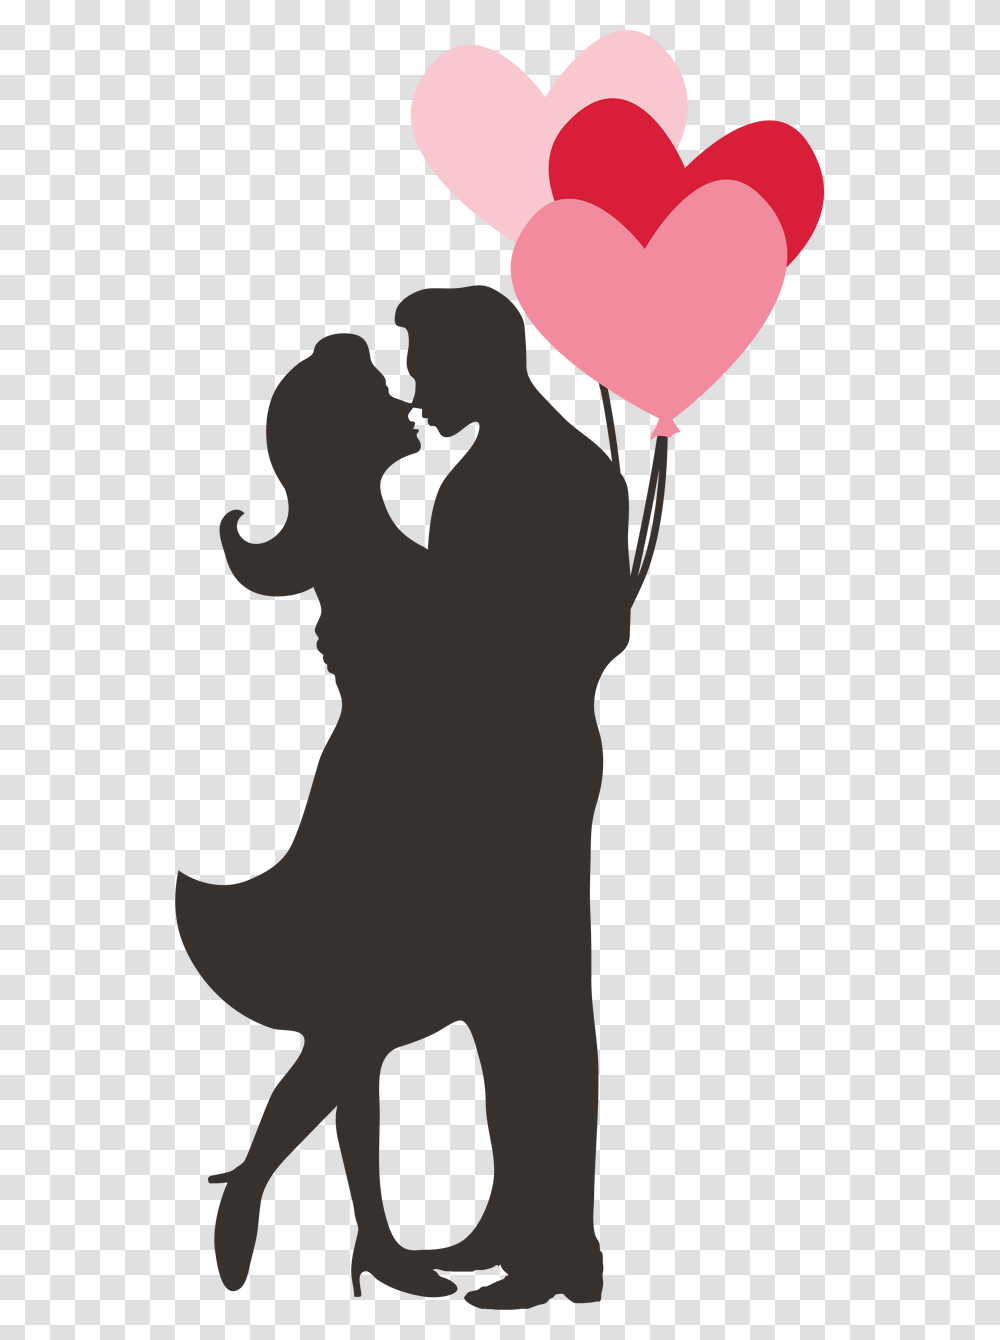 Couple Silhouette Svg Cut File Couple With Balloons Silhouette, Person, Human, Hand, Stencil Transparent Png